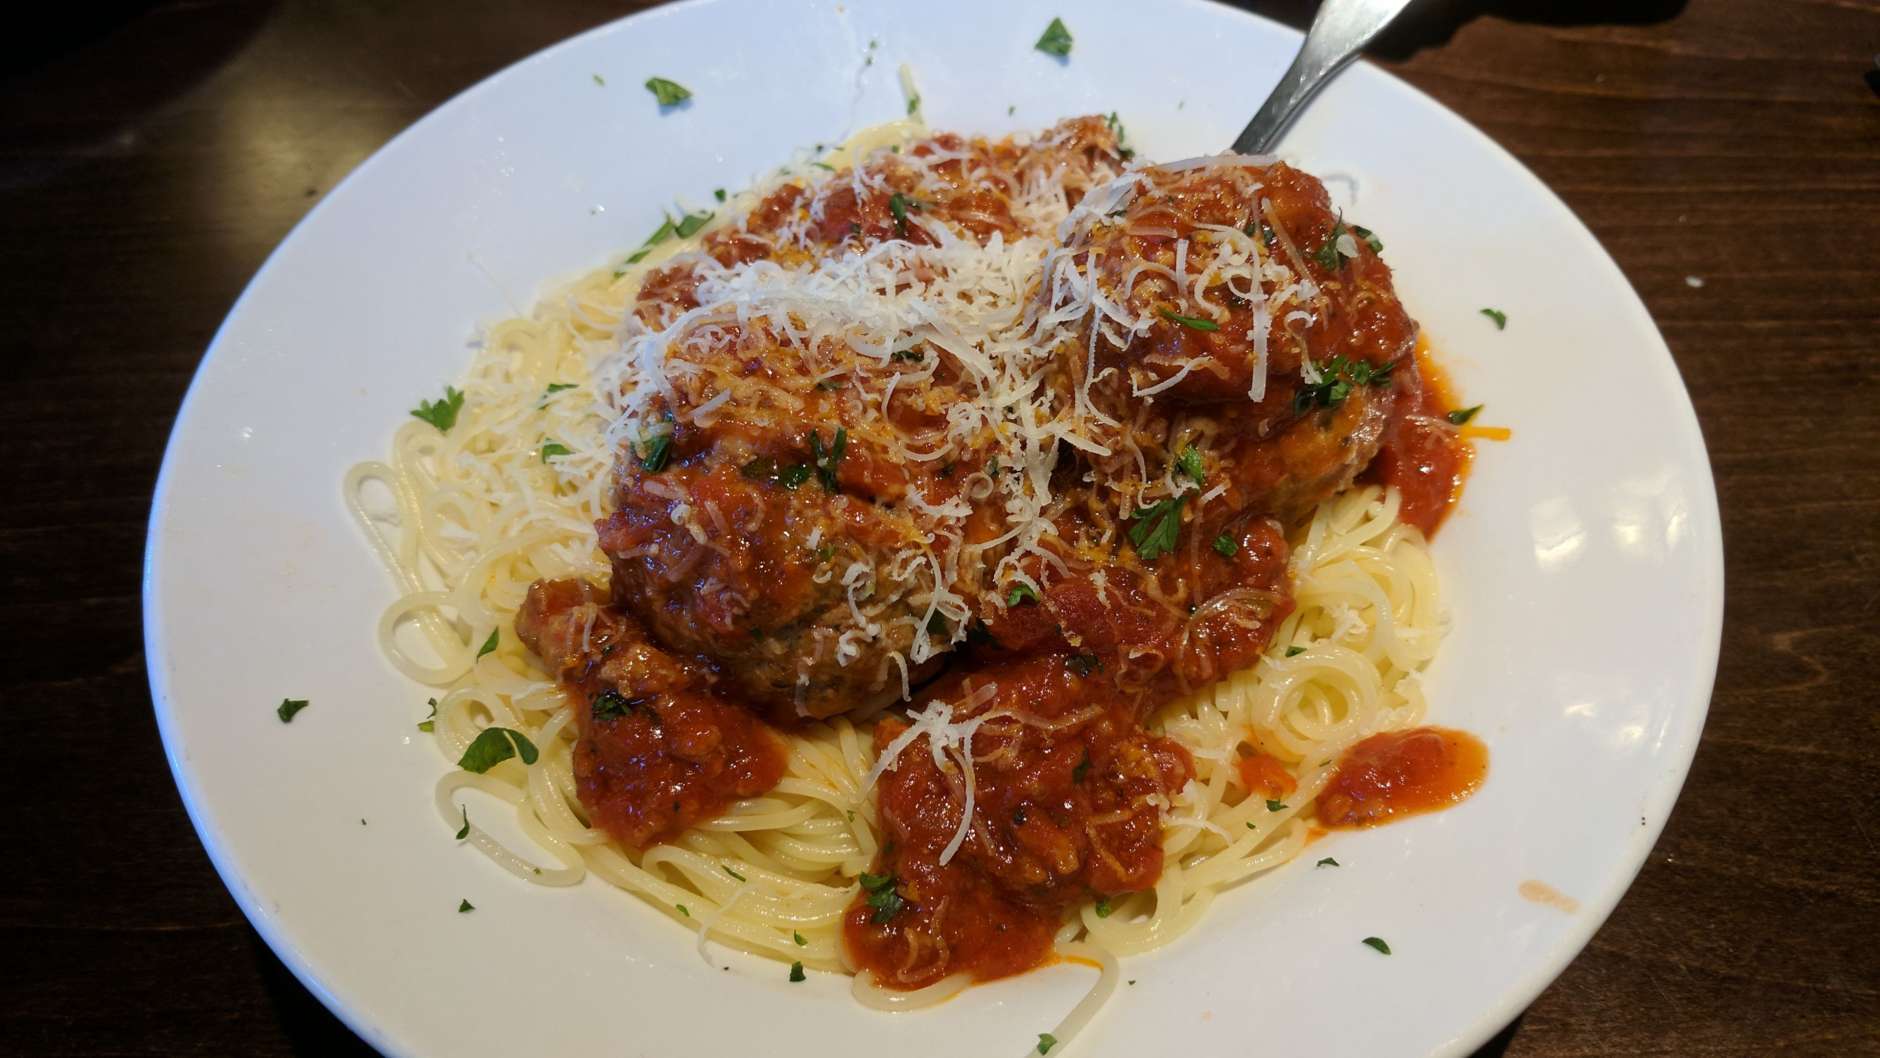 The meal: Angel hair with traditional meat sauce and meatballs. (WTOP/Brandon Millman)